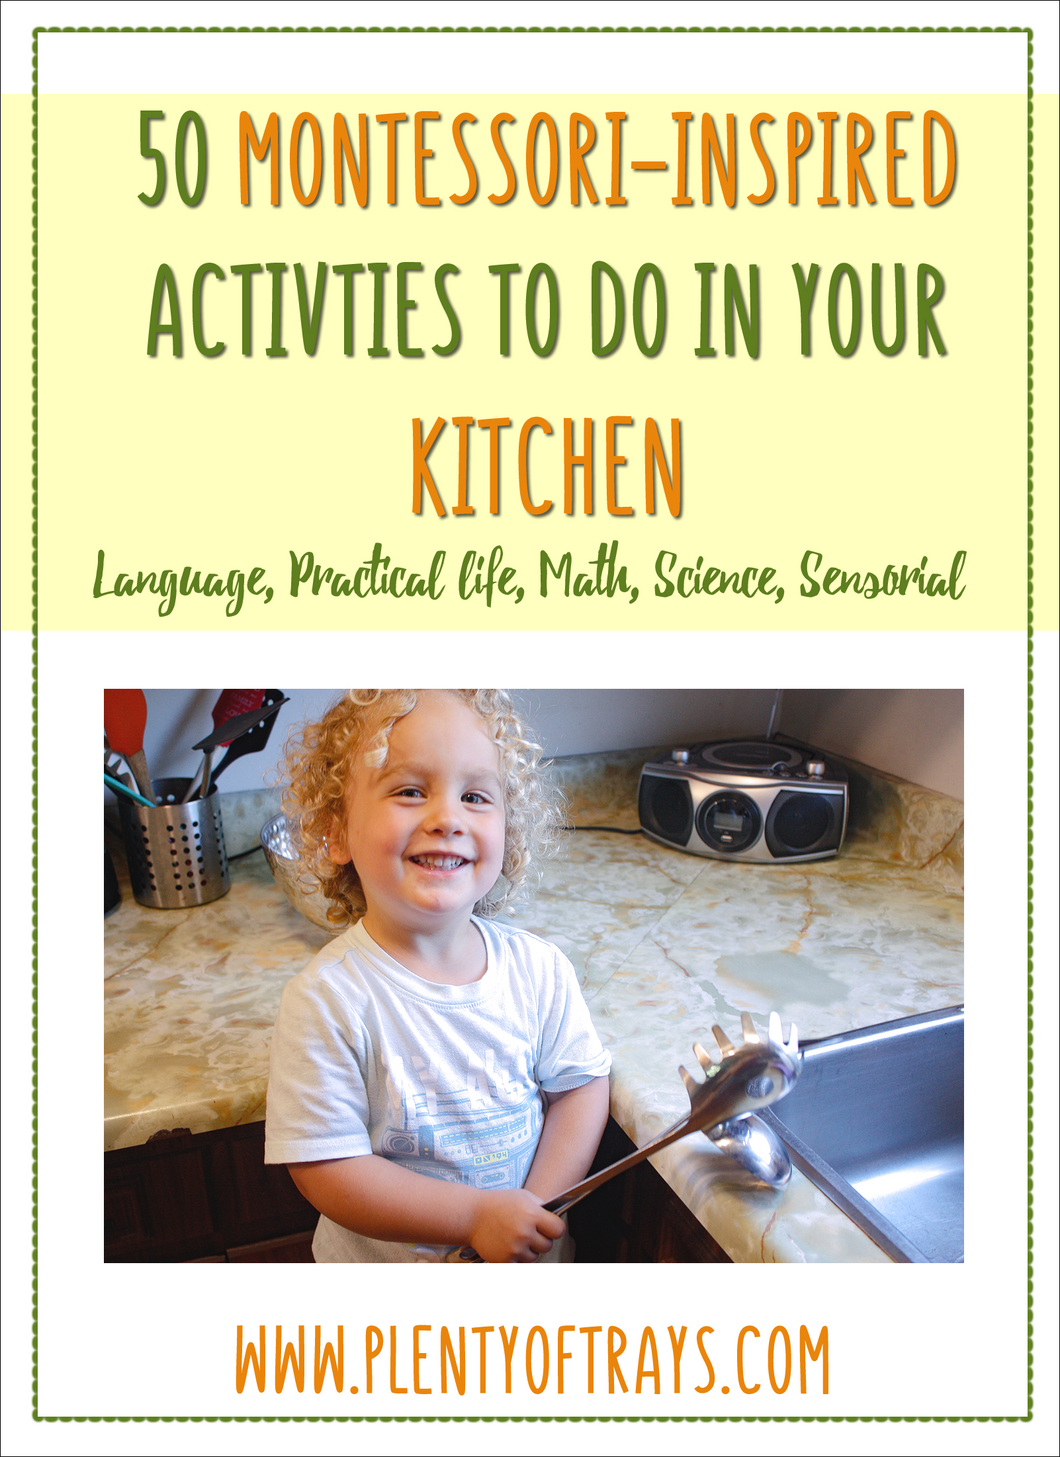 50 Montessori Inspired Activities to do in your Kitchen